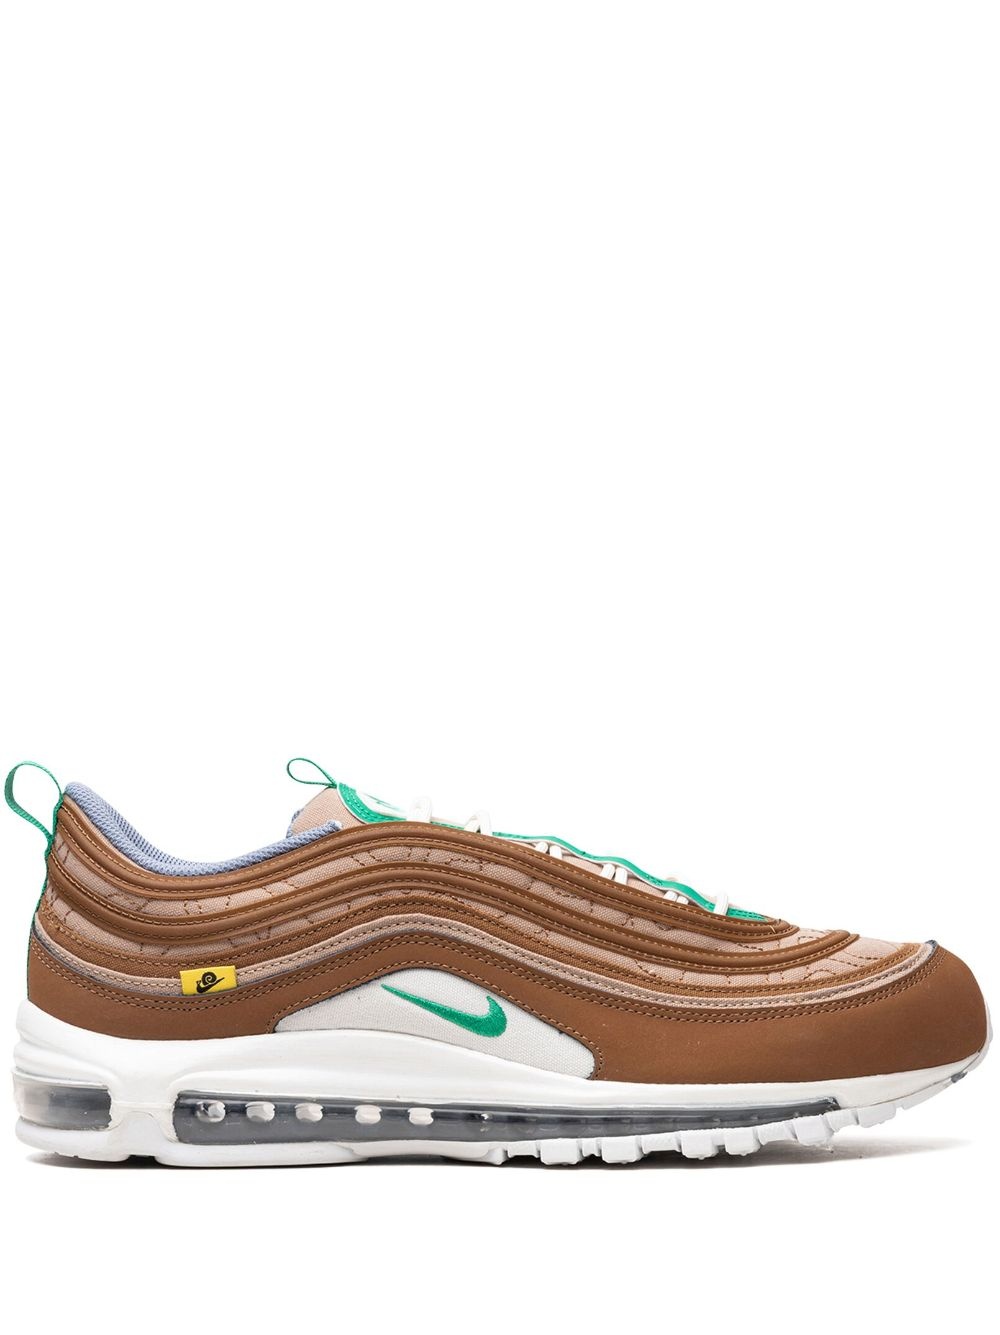 Air Max 97 SE "Moving Company" sneakers - 1